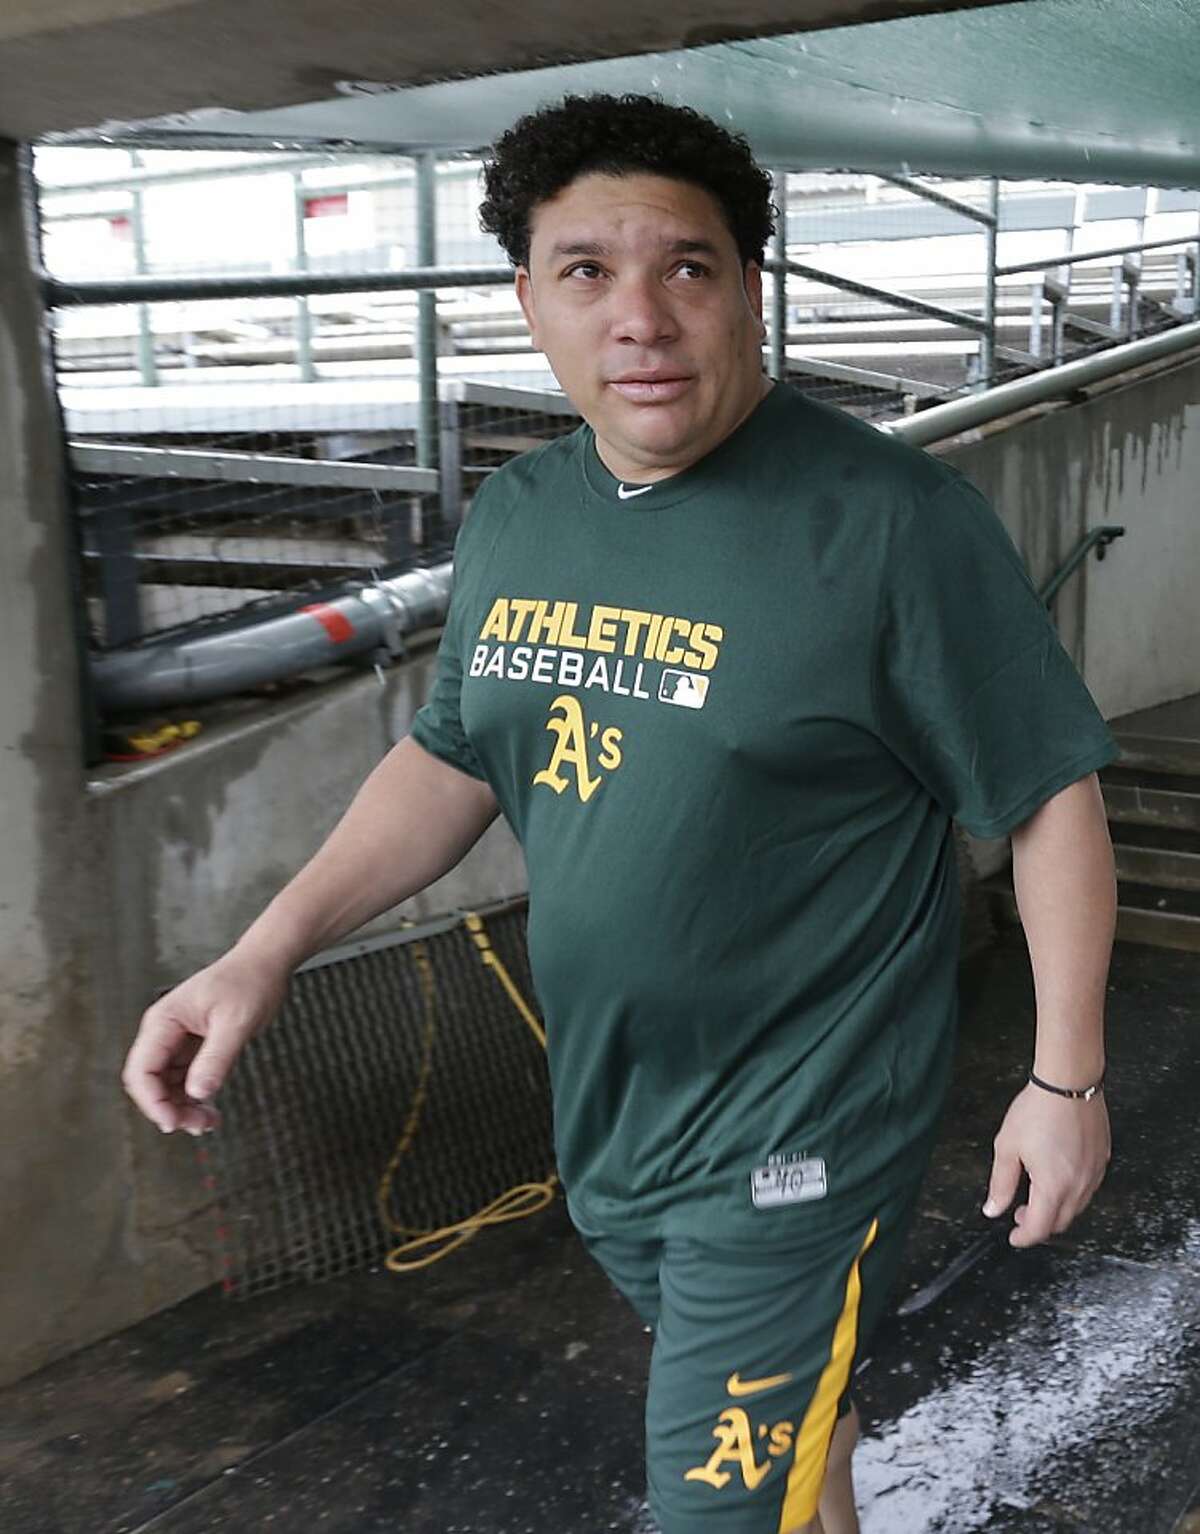 Oakland Athletics' Bartolo Colon walks to take his physical Monday, Feb. 11, 2013, in Phoenix. The Athletics' pitchers and catchers start practice Tuesday. (AP Photo/Darron Cummings)